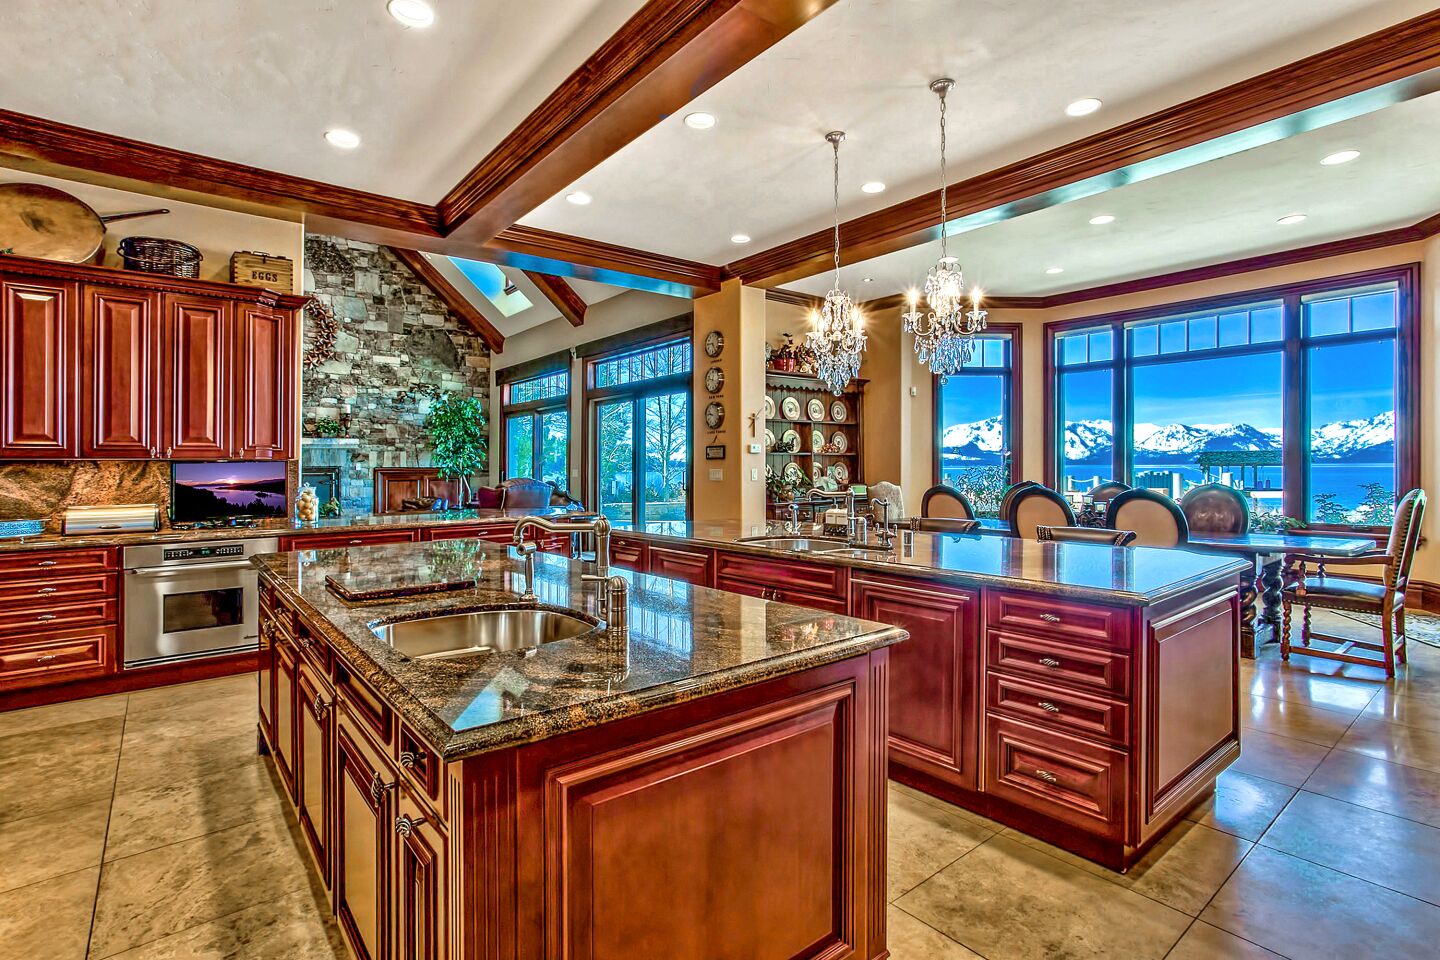 The home's kitchen and dining areas with dark wood cabinetry, granite countertops and picture windows with views of the lake